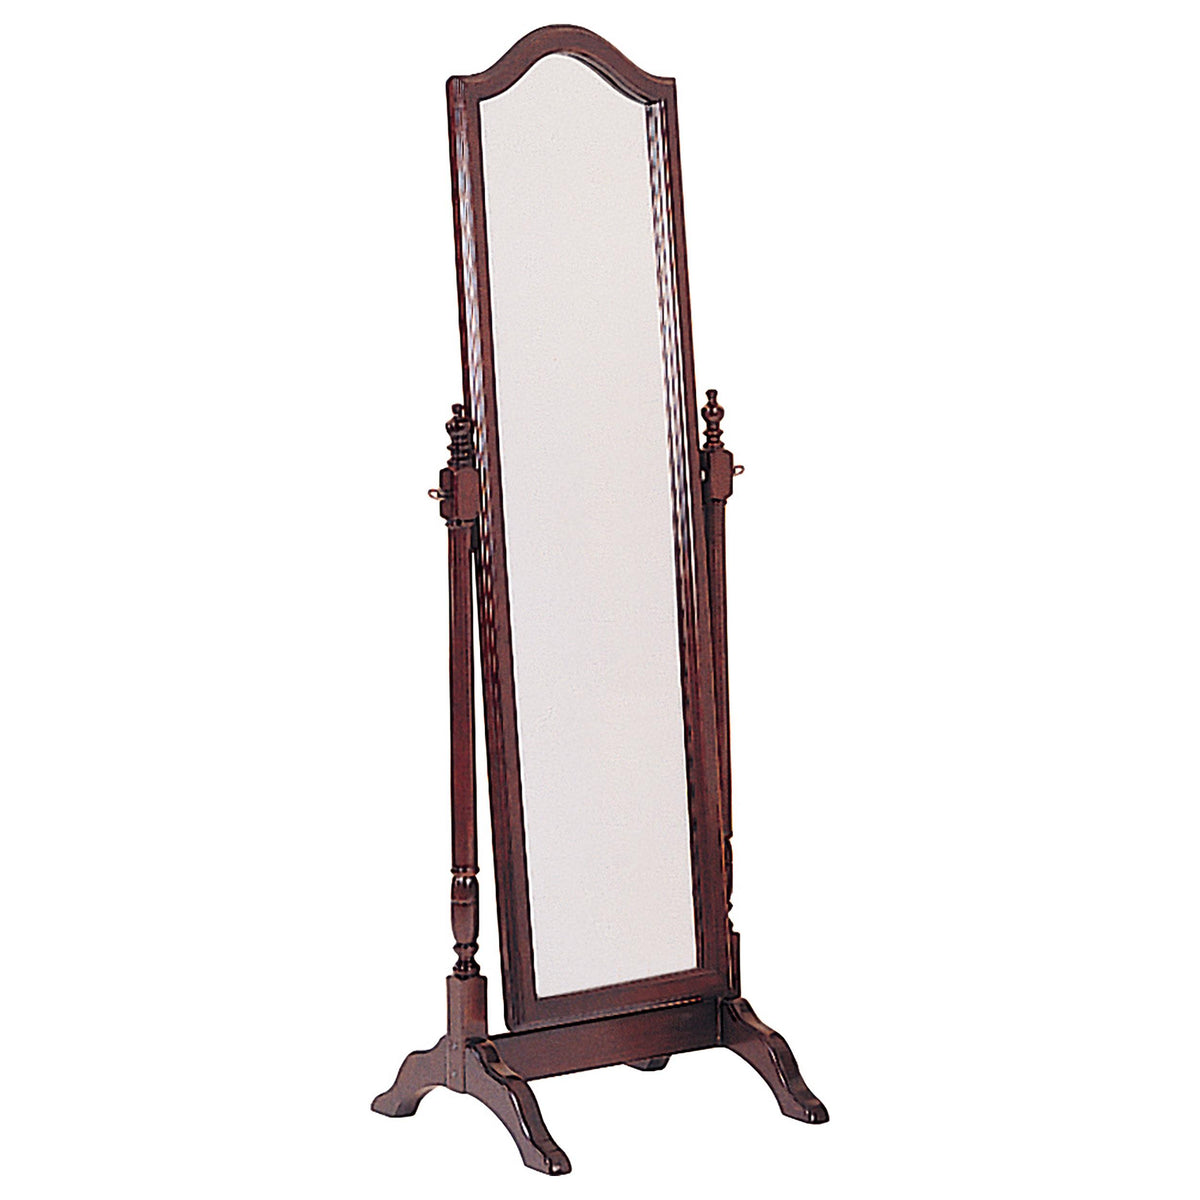 Cabot Rectangular Cheval Mirror with Arched Top Merlot  Half Price Furniture